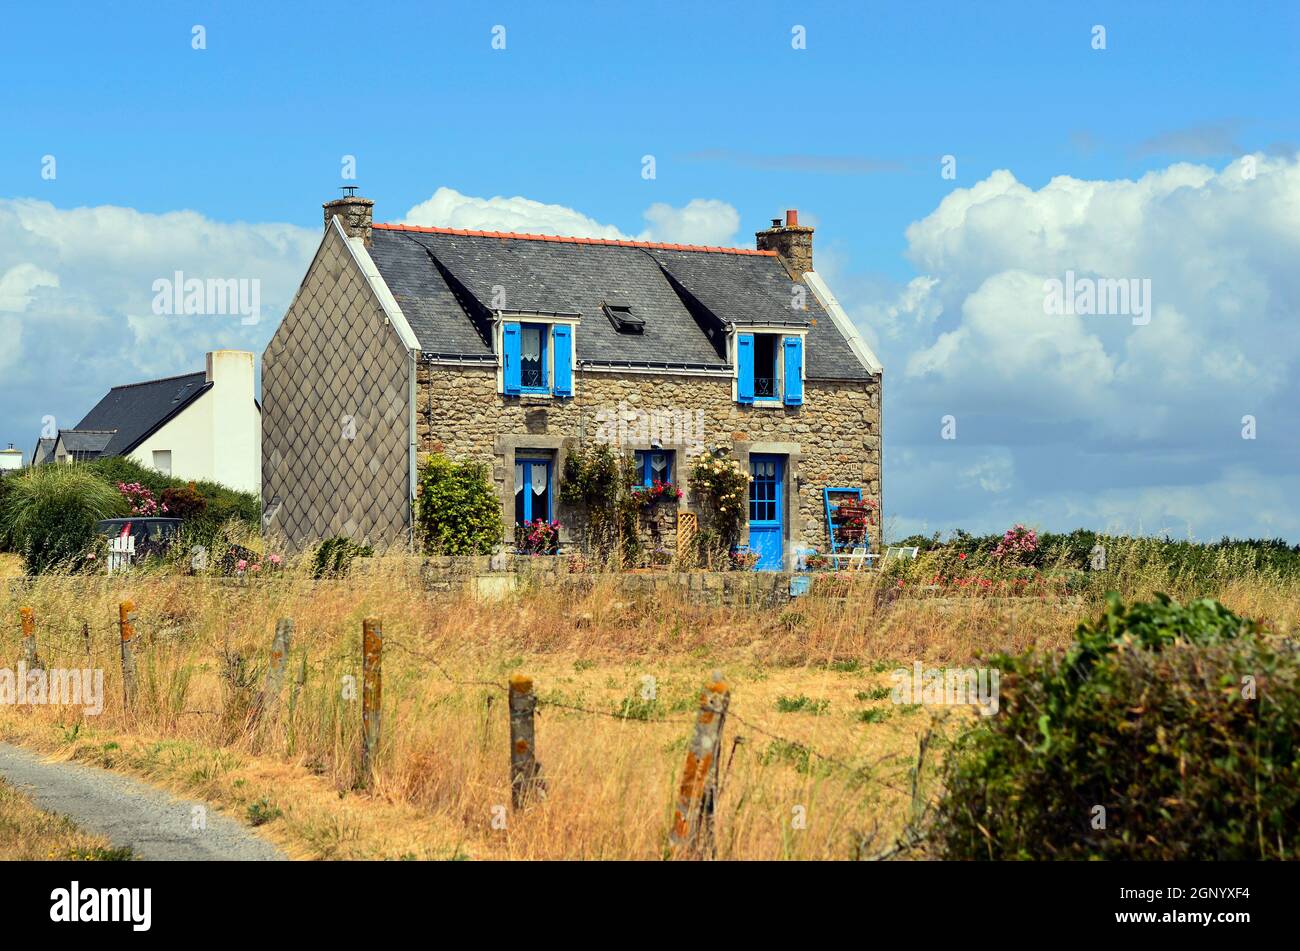 France, Carnac, stone built home with colorful windows Stock Photo